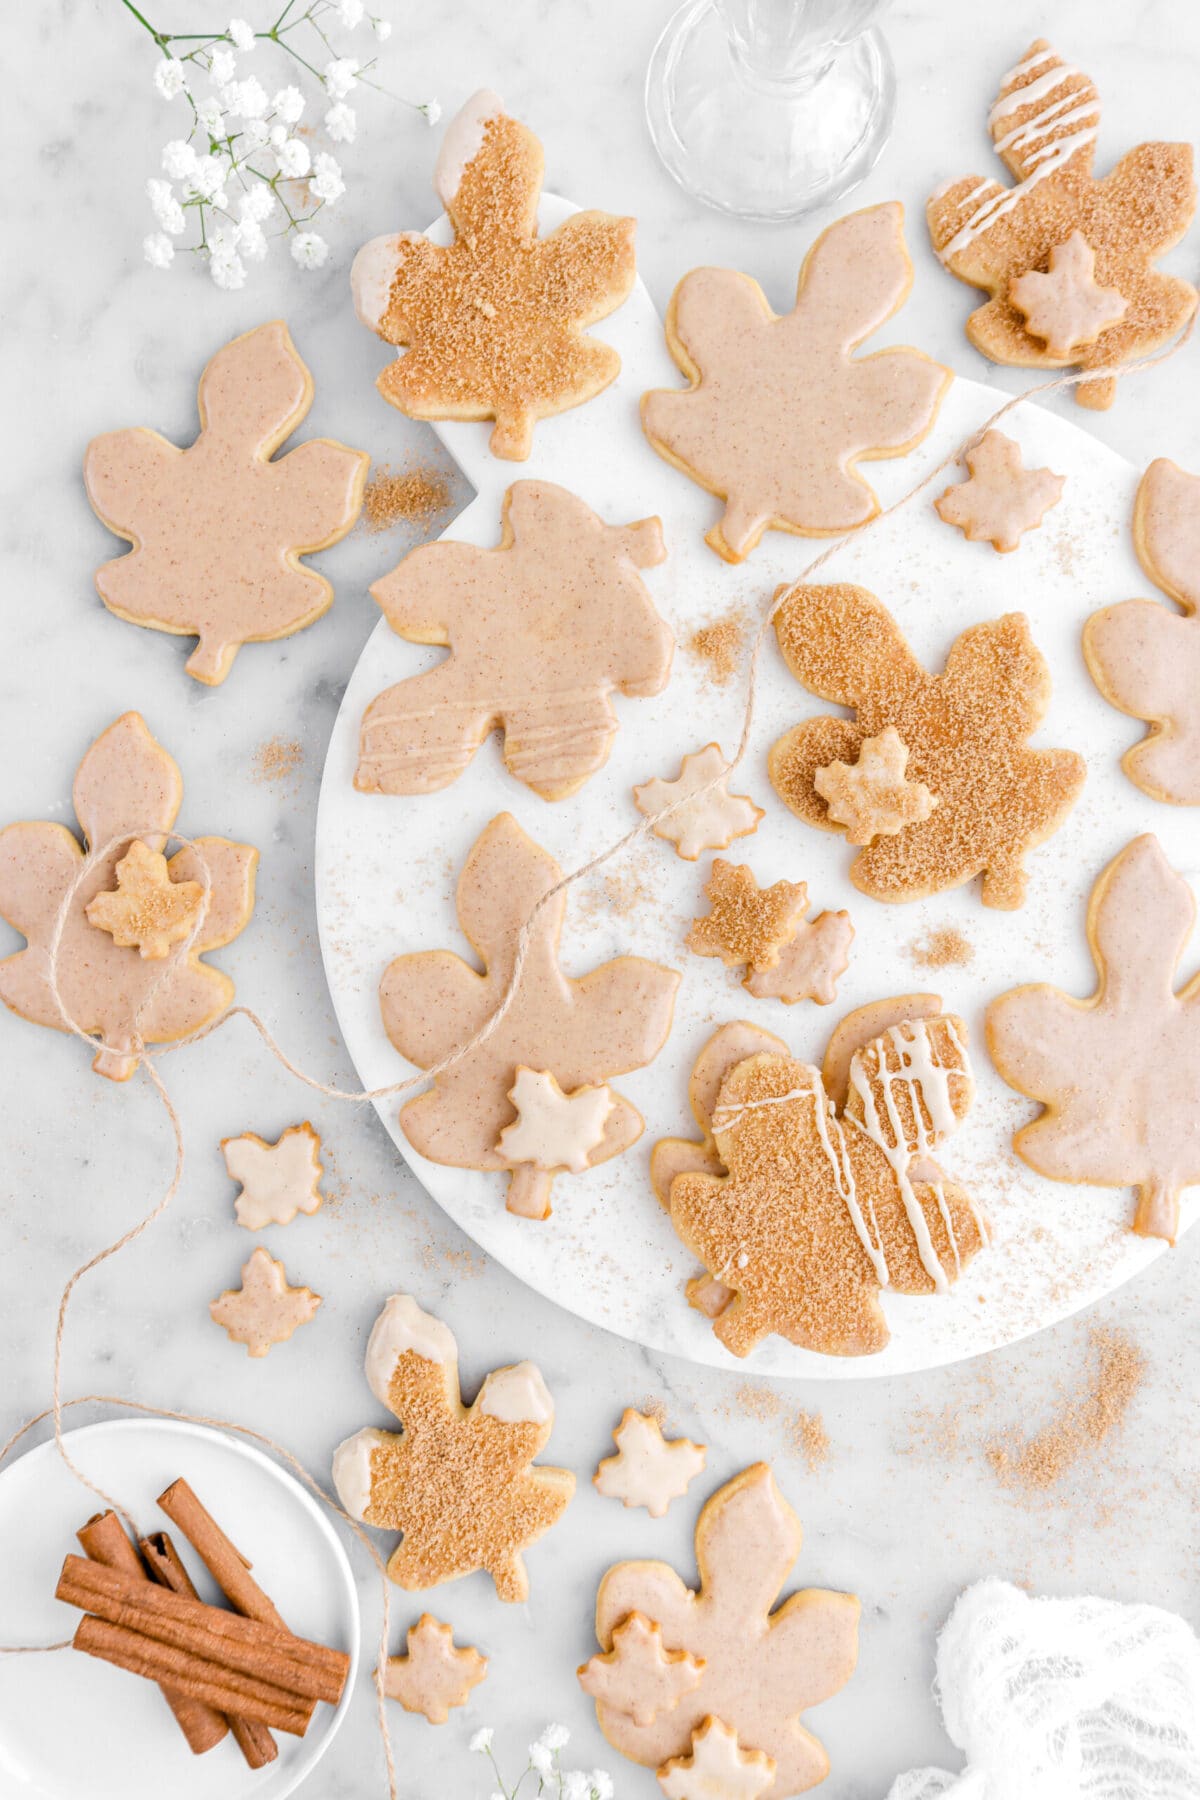 cropped overhead image of maple leaf shaped cookies on marble surface with cinnamon sugar around, cinnamon sticks, and cooking twine on marble surface.